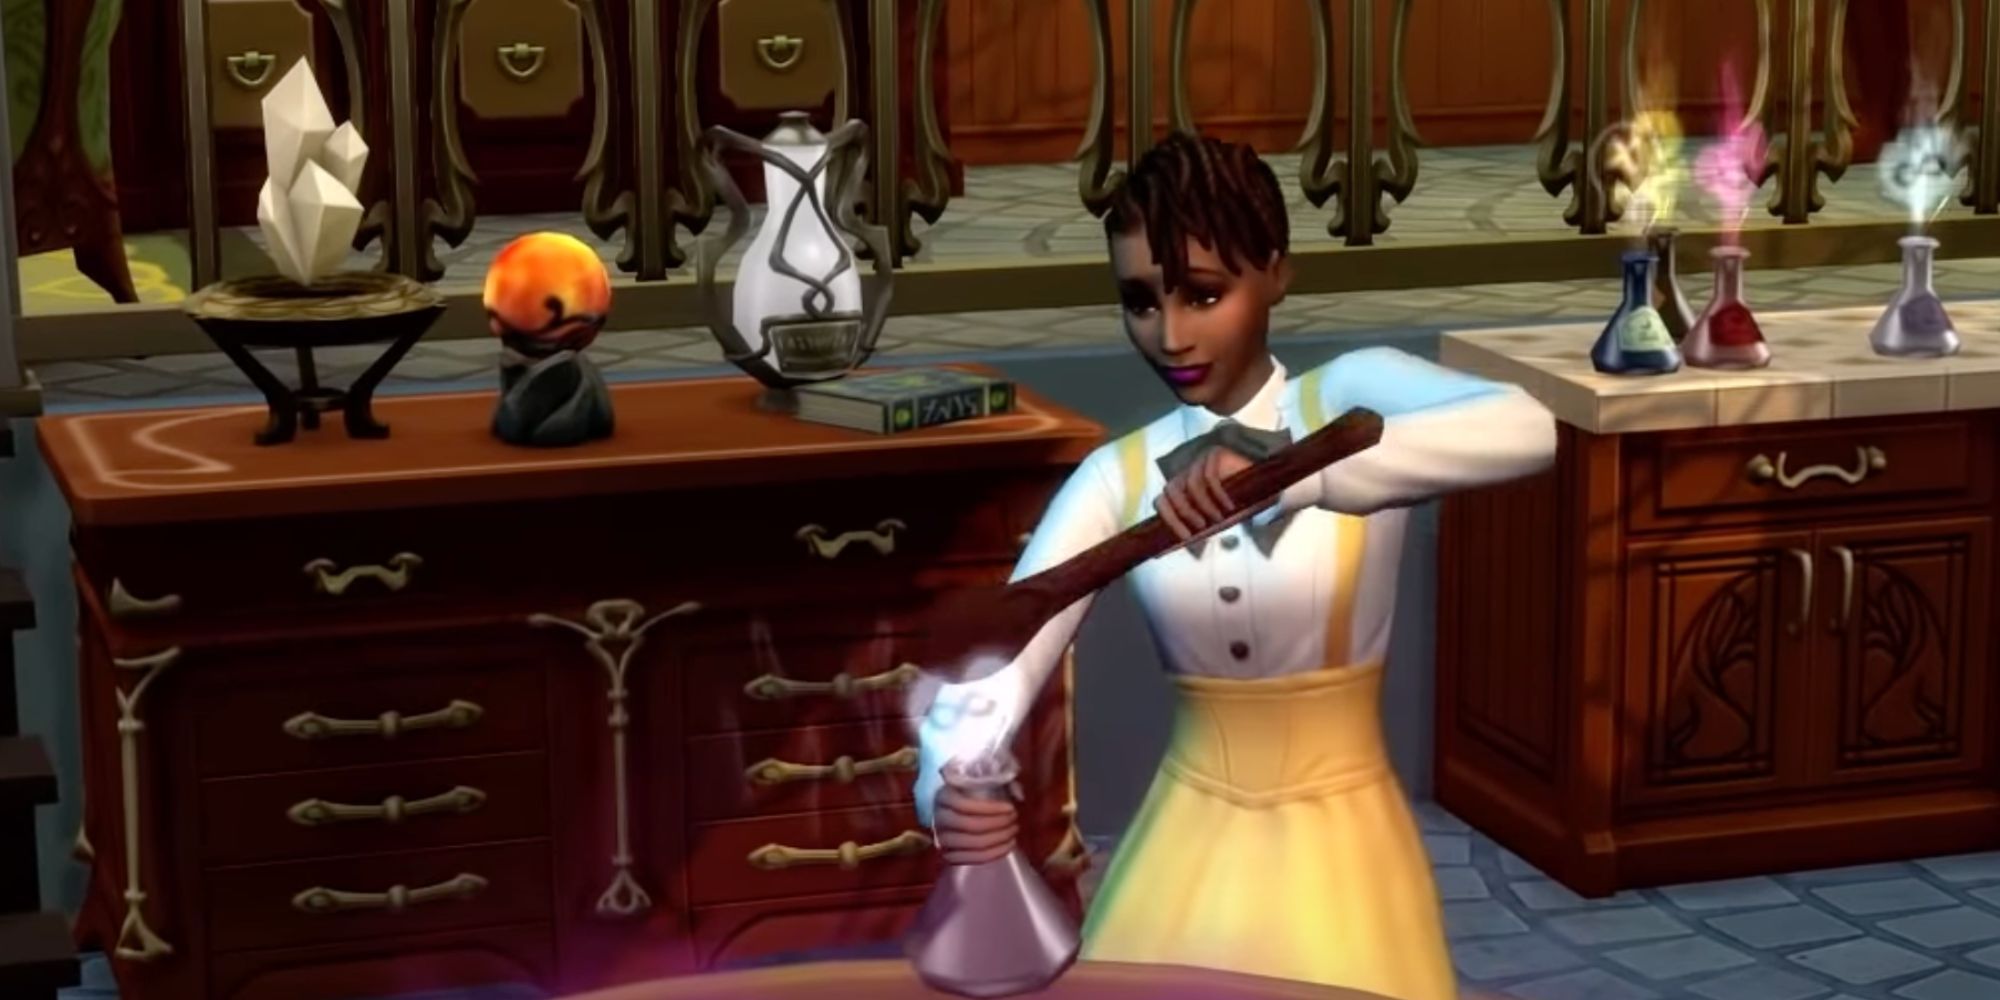 A Sim from The Sims 4 Realm Of Magic Creating A Potion With A Moonstone On A Cabinet In The Background